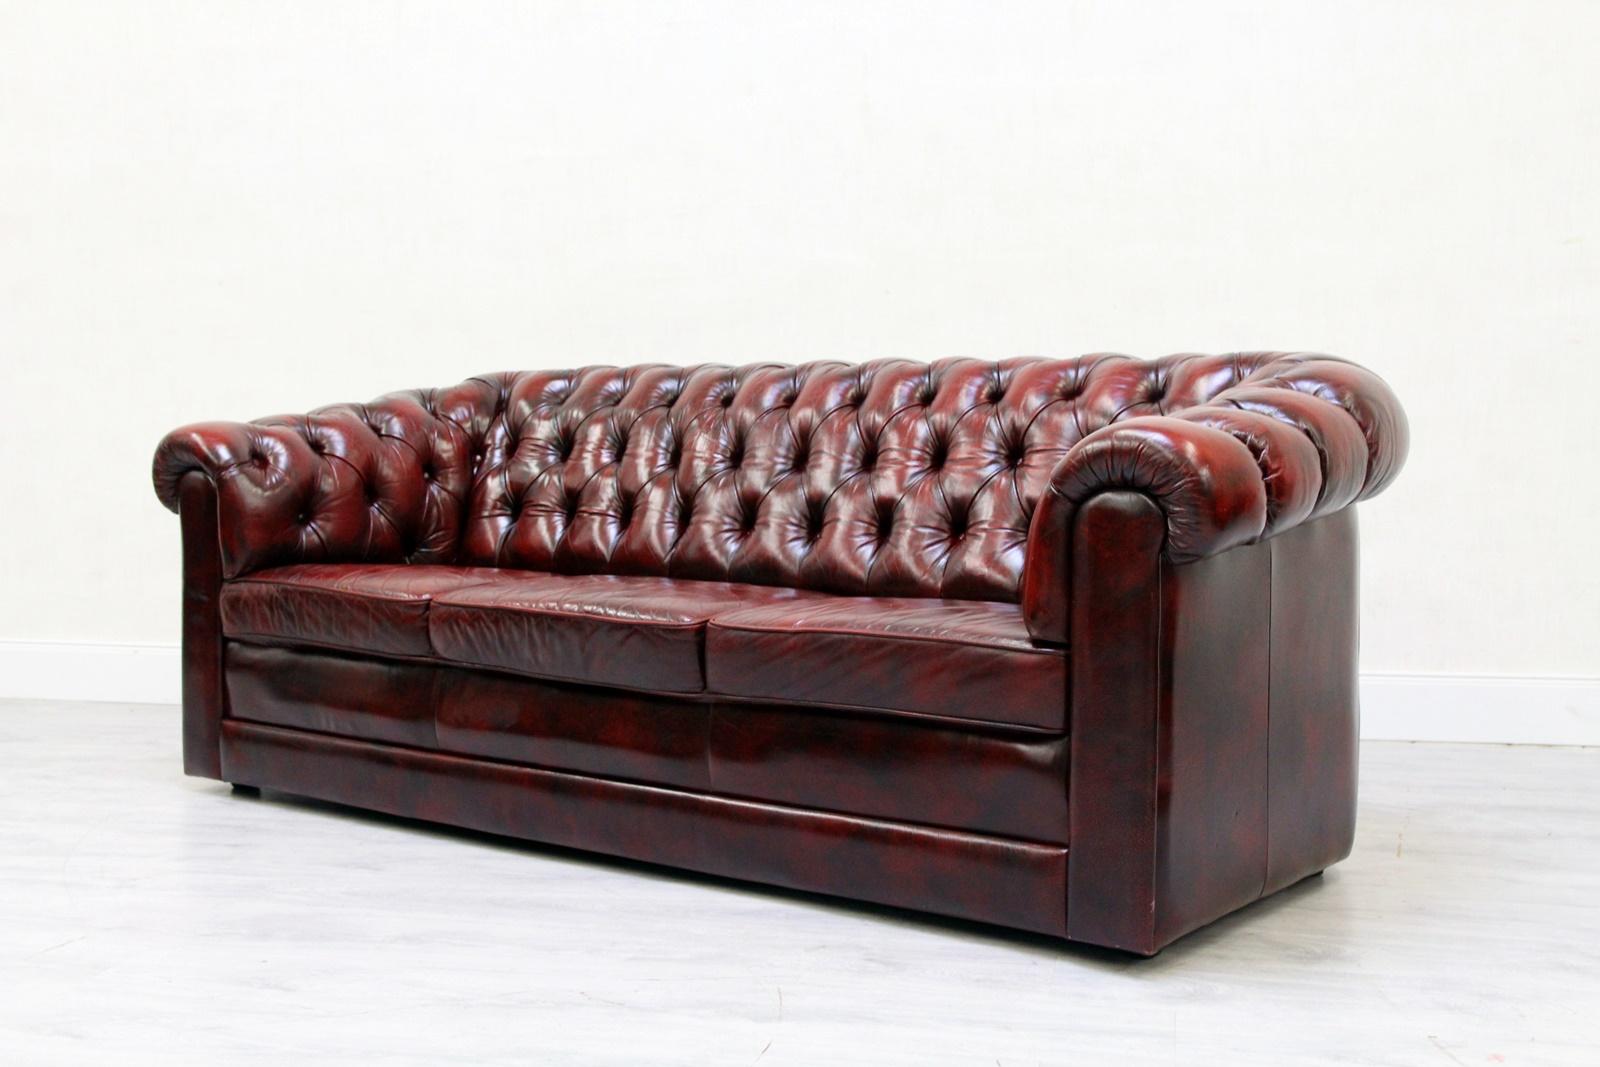 Chesterfield Sofa Leather Antique Vintage Couch English Real Leather For Sale 1